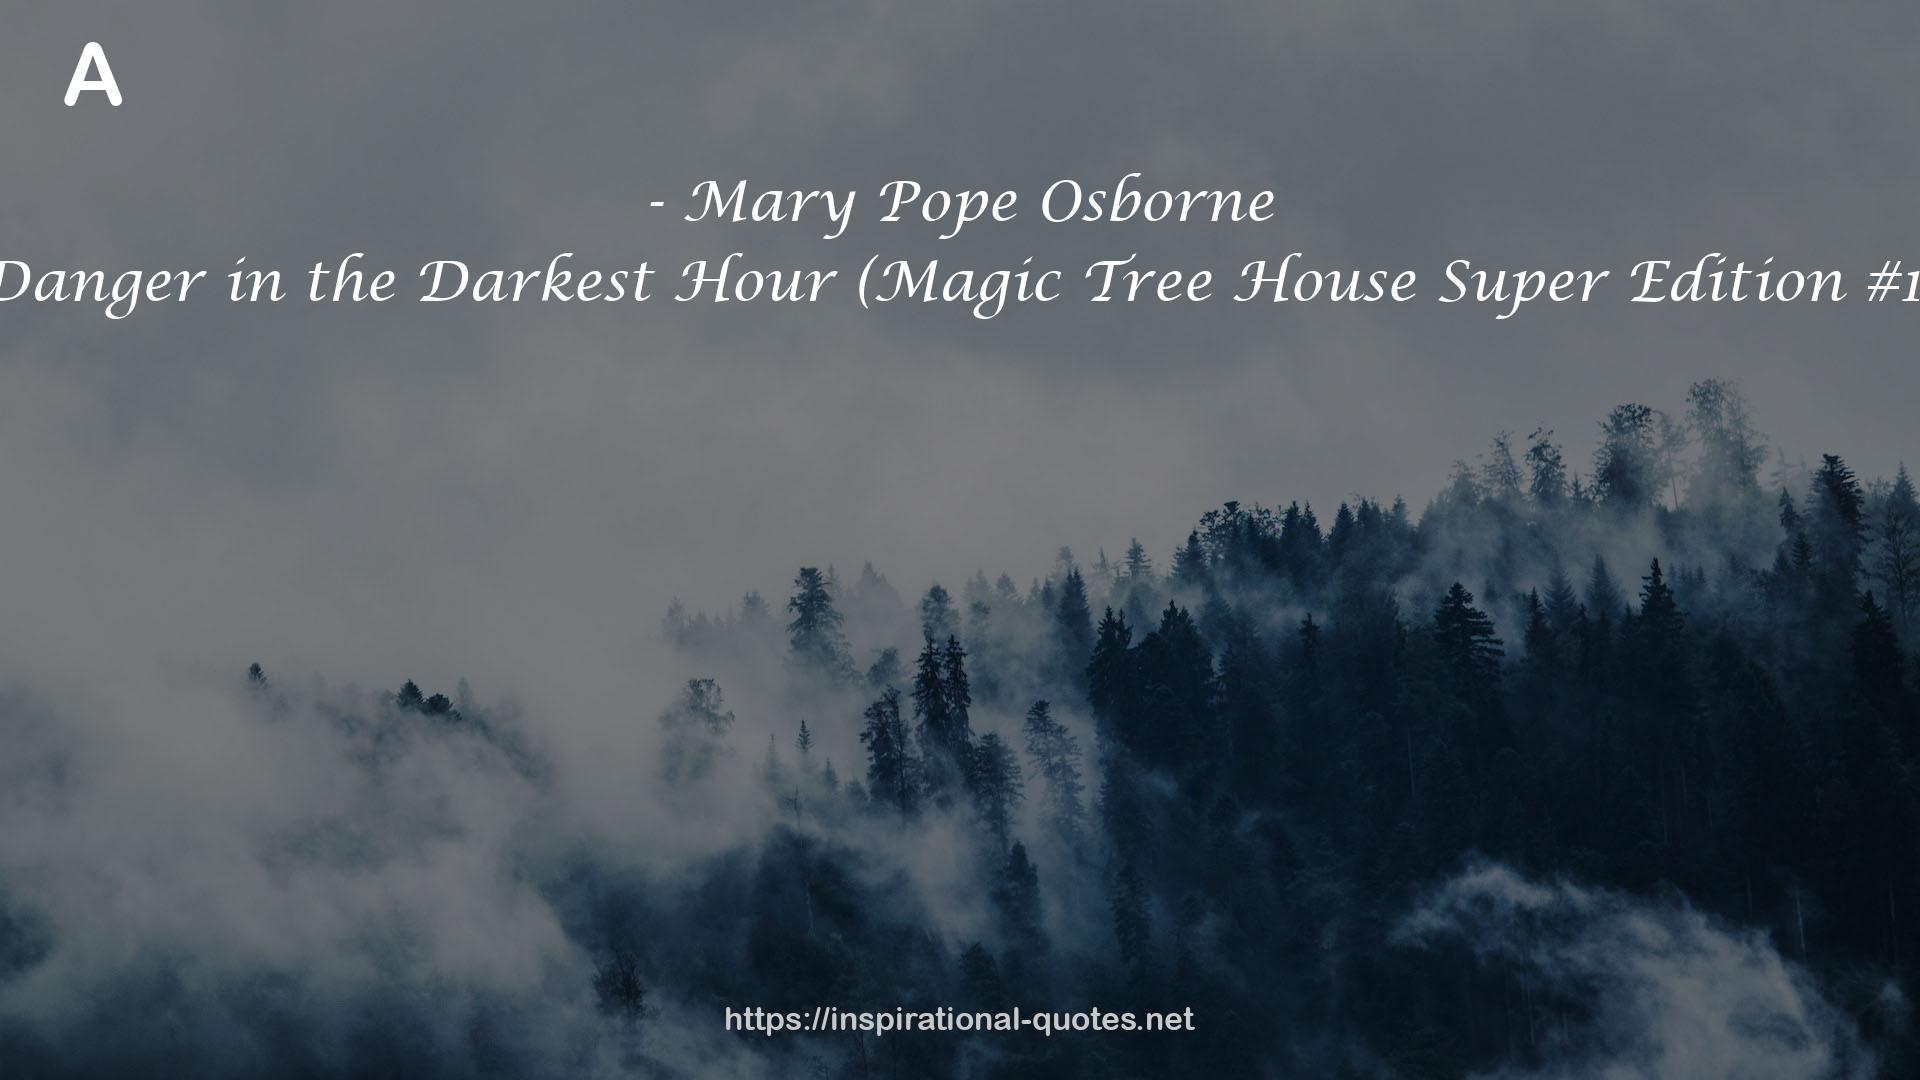 Danger in the Darkest Hour (Magic Tree House Super Edition #1) QUOTES